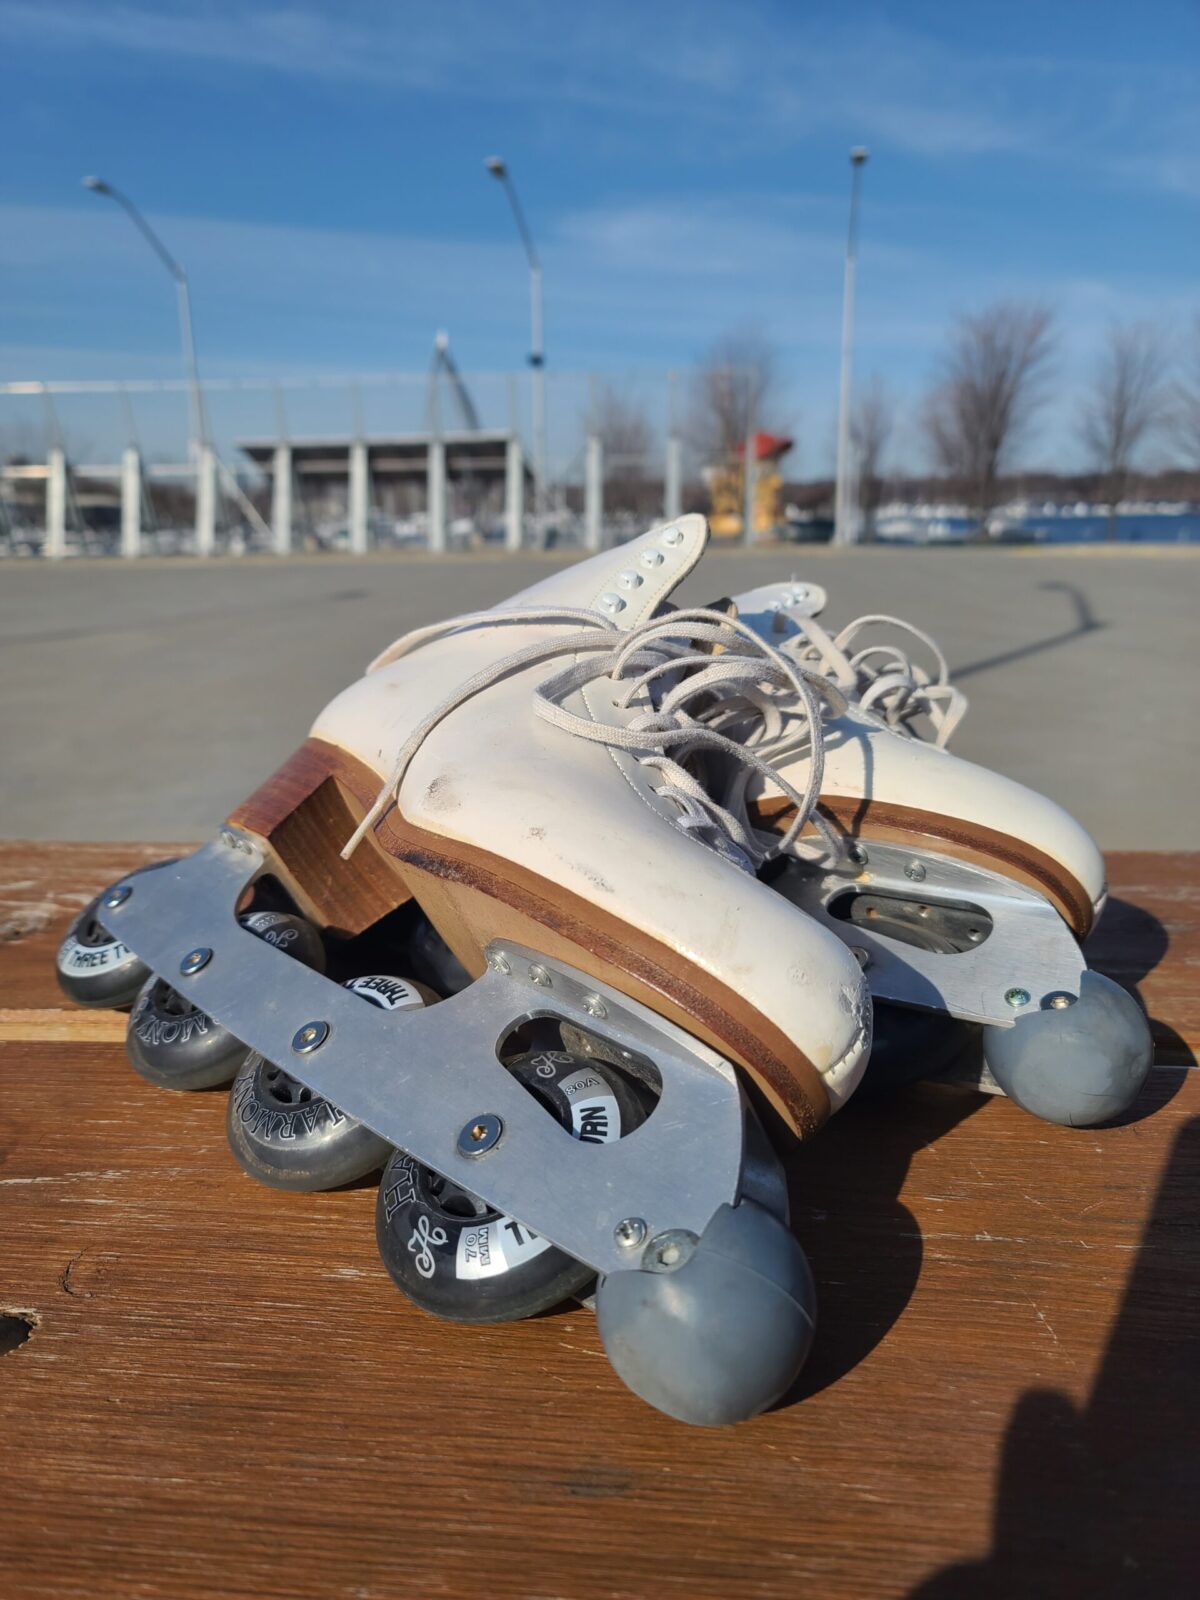 A pair of inline roller skates on a picnic table.